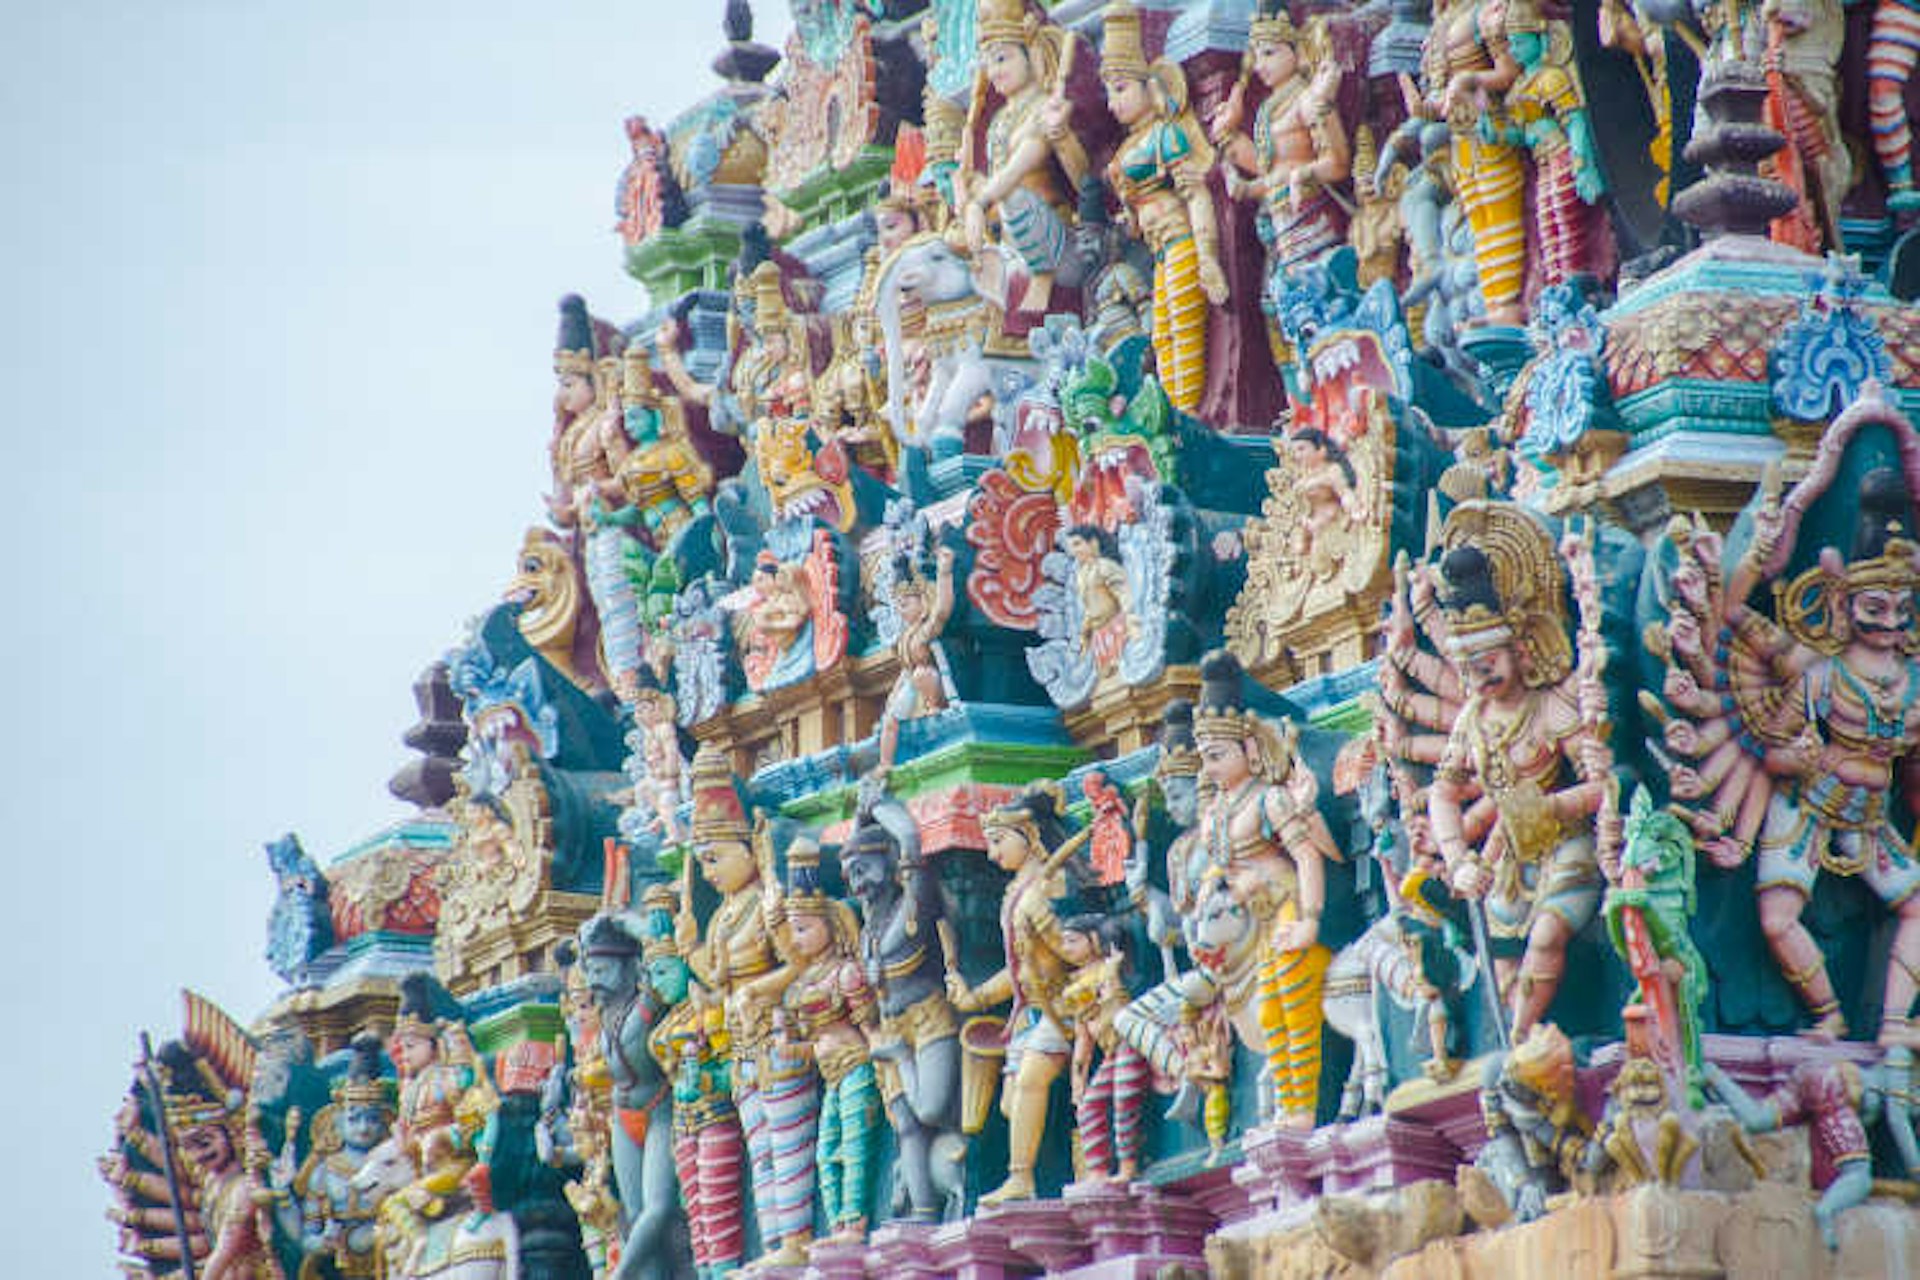 Sculpted deities in rainbow colours on the Meenakshi Amman Temple. Image by cotaro70s / CC BY-ND 2.0.